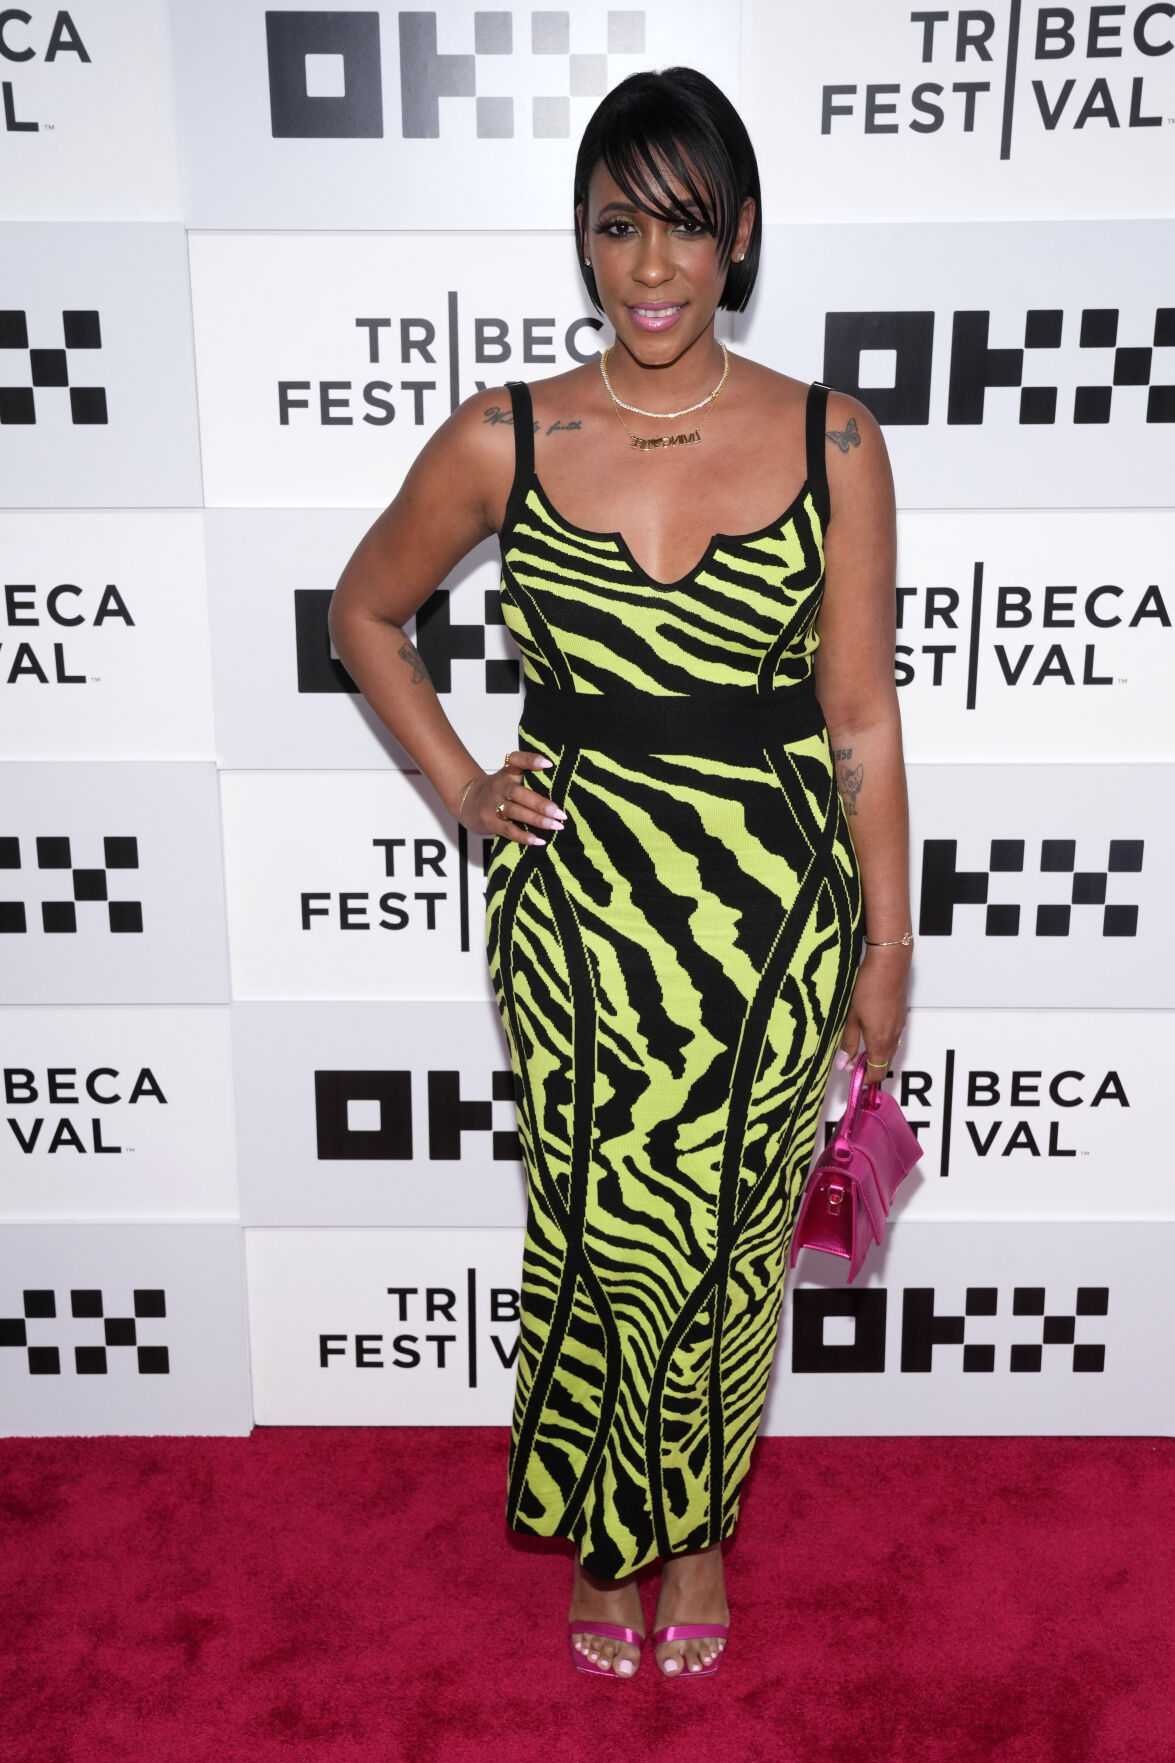 Martha Luna attends the premiere of "The Walking Dead: Dead City" at the BMCC Tribeca Performing Arts Center during the Tribeca Festival on Tuesday, June 13, 2023, in New York.